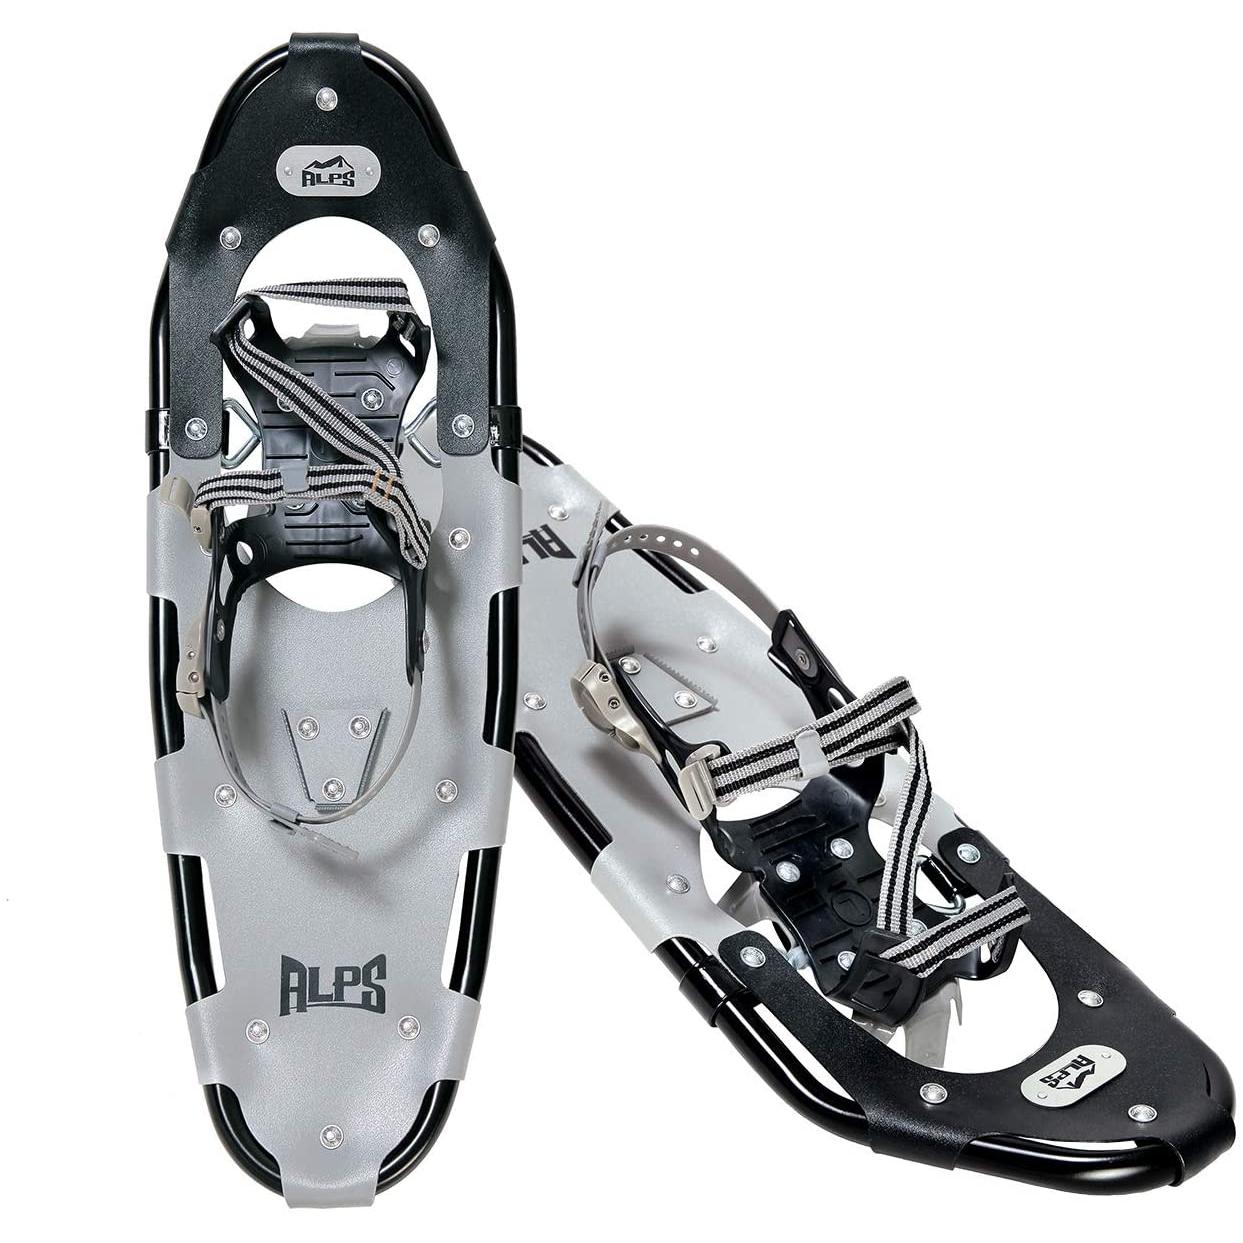 ALPS 22/25/27/30 Inches Snowshoes for Men， Women, Aluminum Snow Shoes for All Terrain with Fully Adjustable Binding and Carry Bag